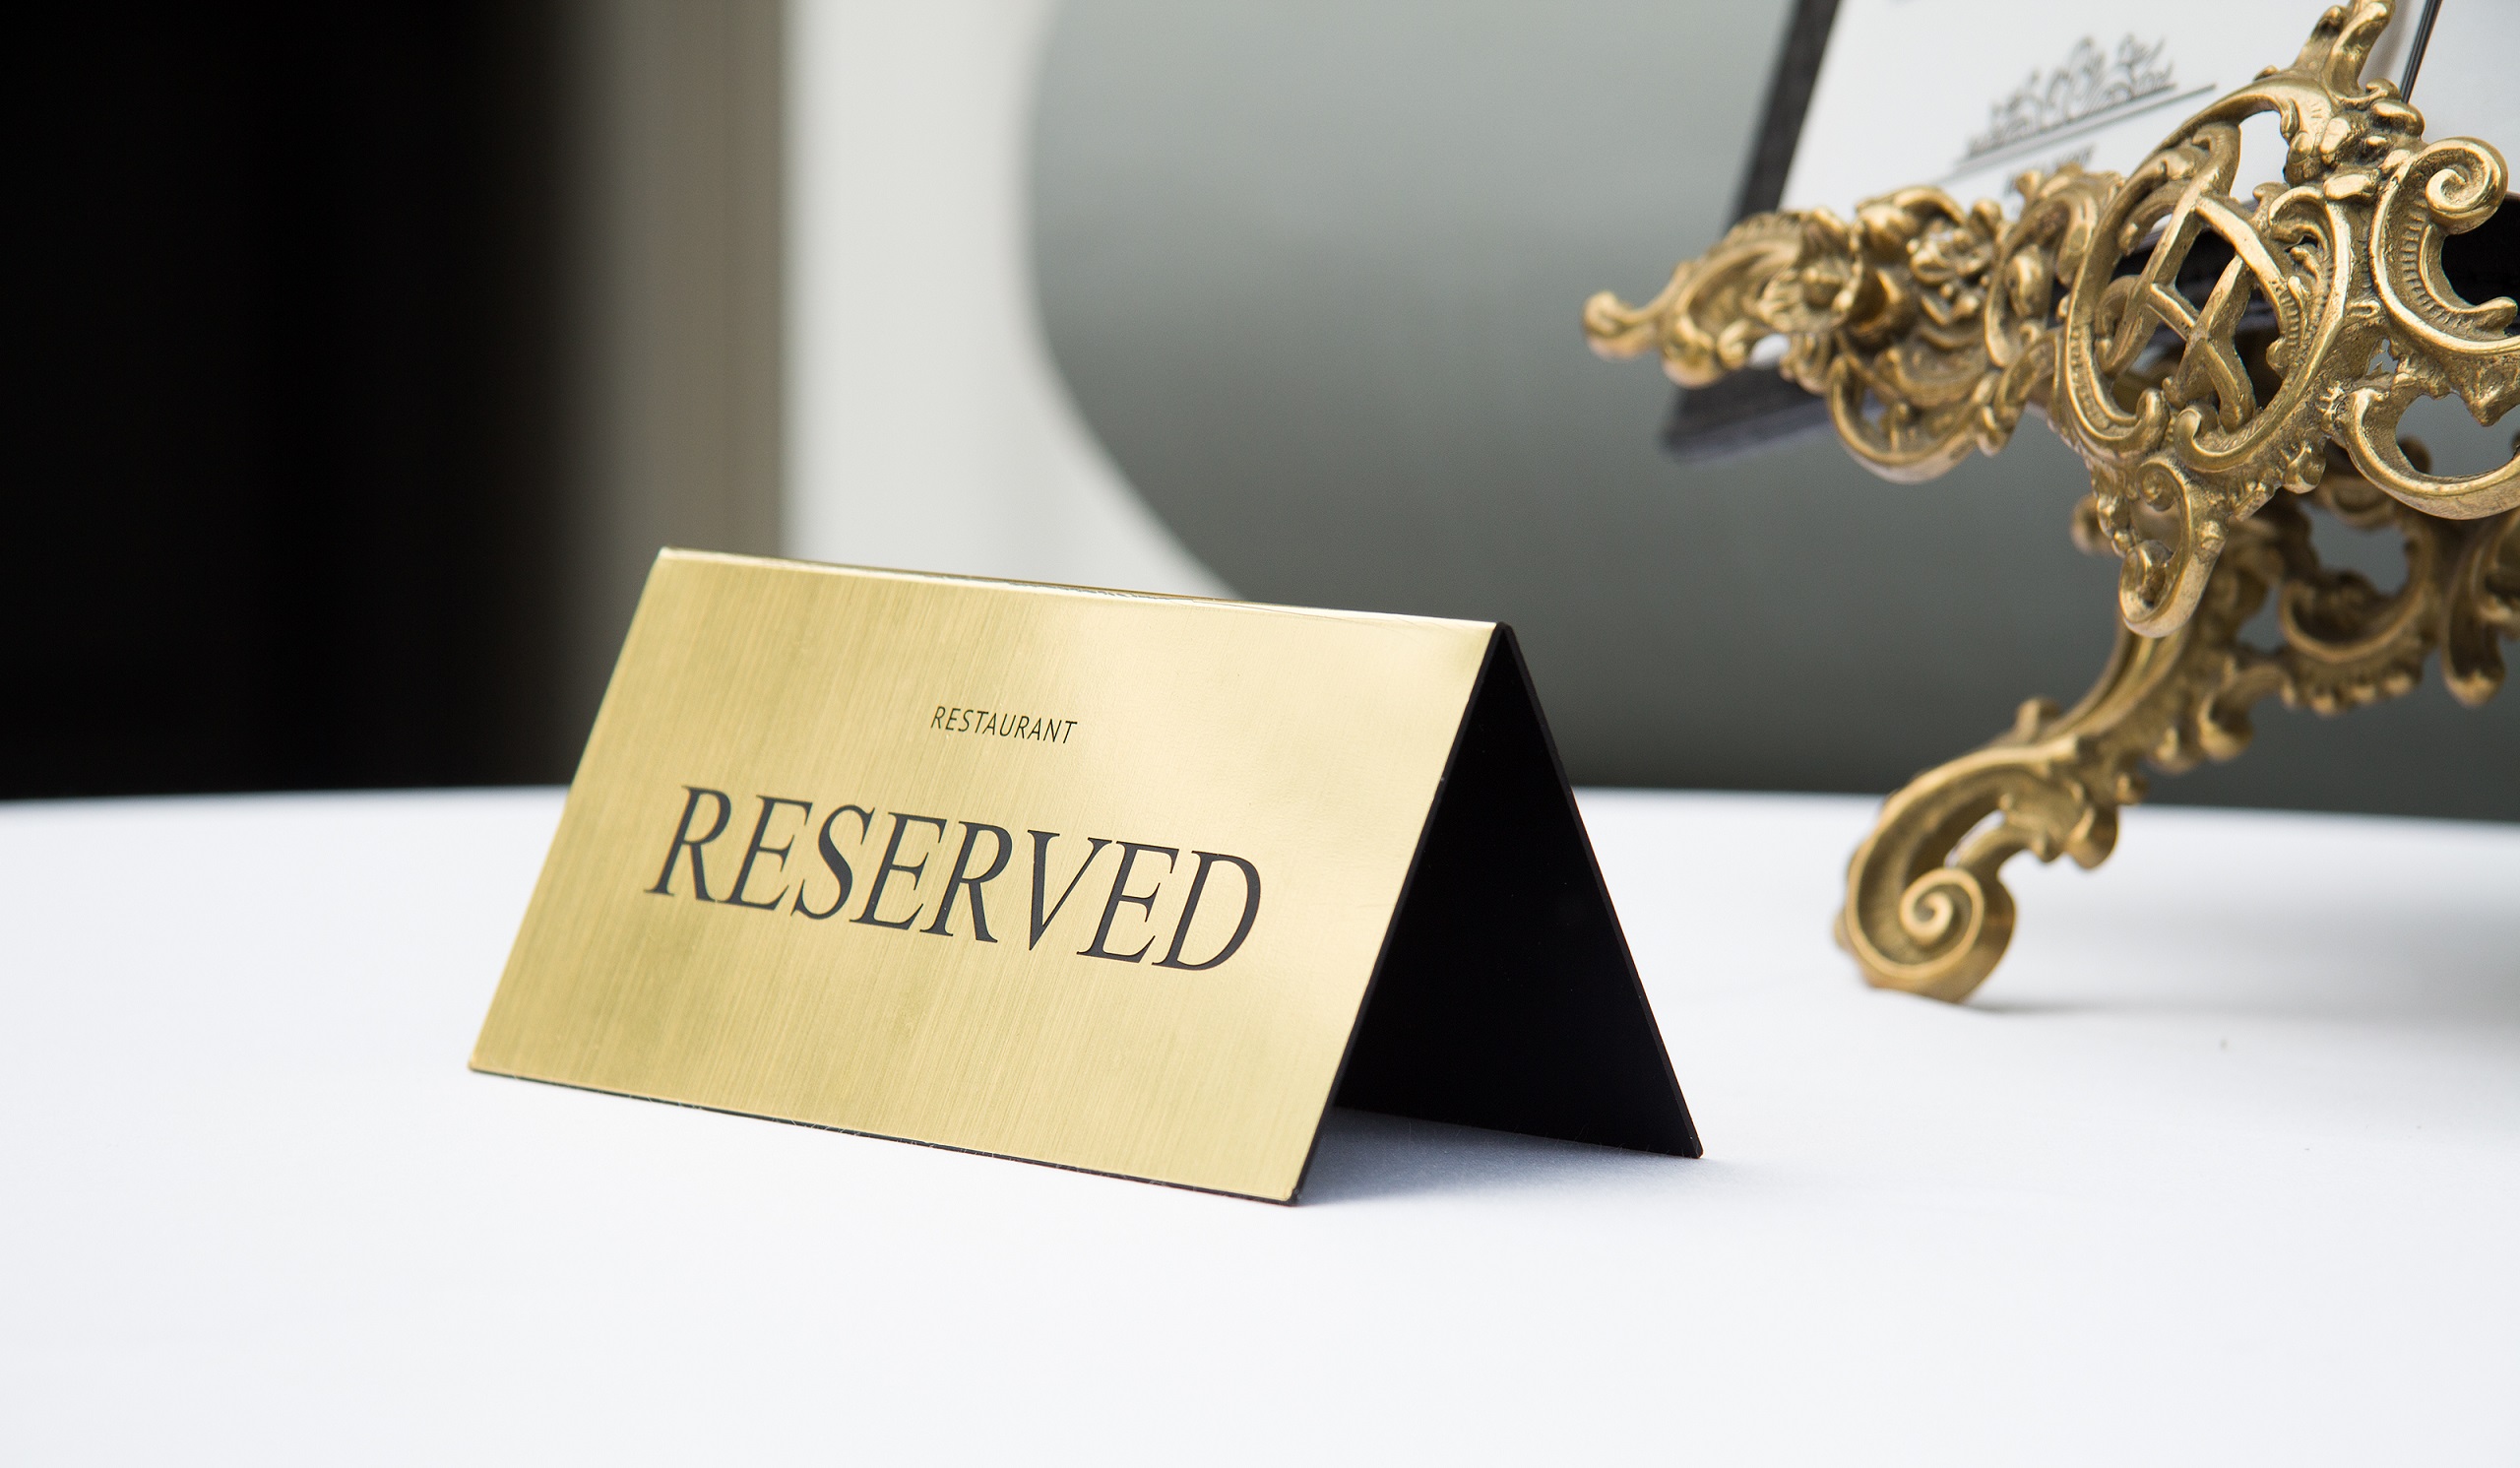 A gold-plated, engraved reserved sign on a restaurant table covered with a white tablecloth also seeing the bottom of an easel picture stand.